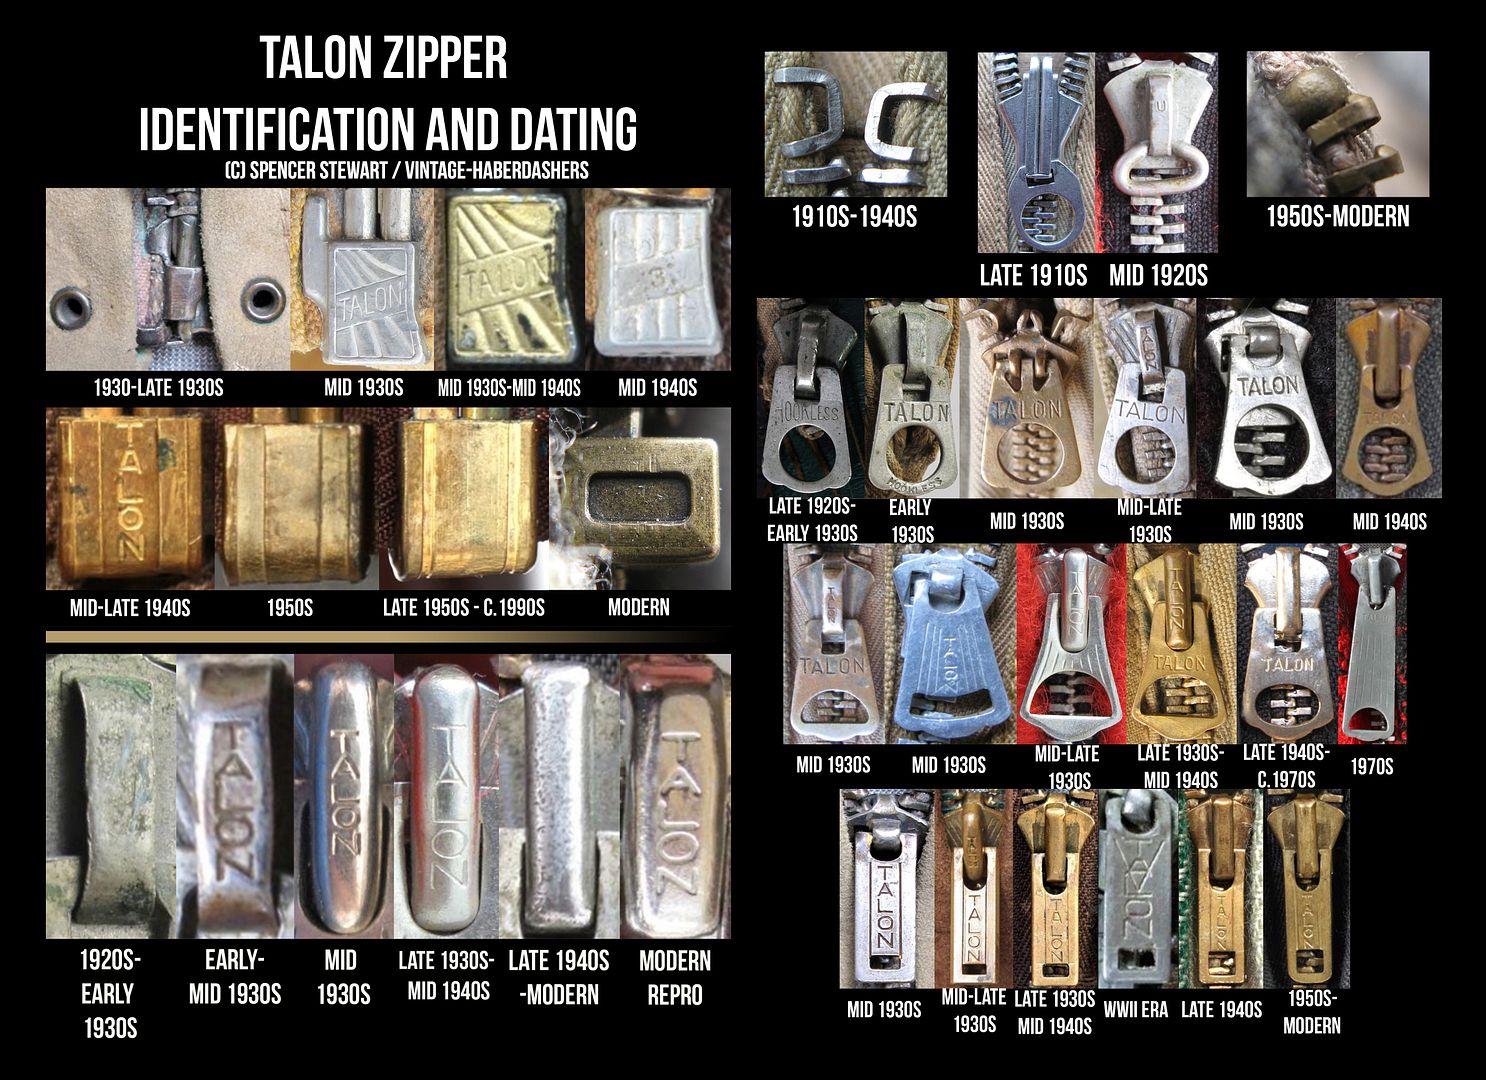 A guide to dating Talon Zippers | Vintage-Haberdashers Blog